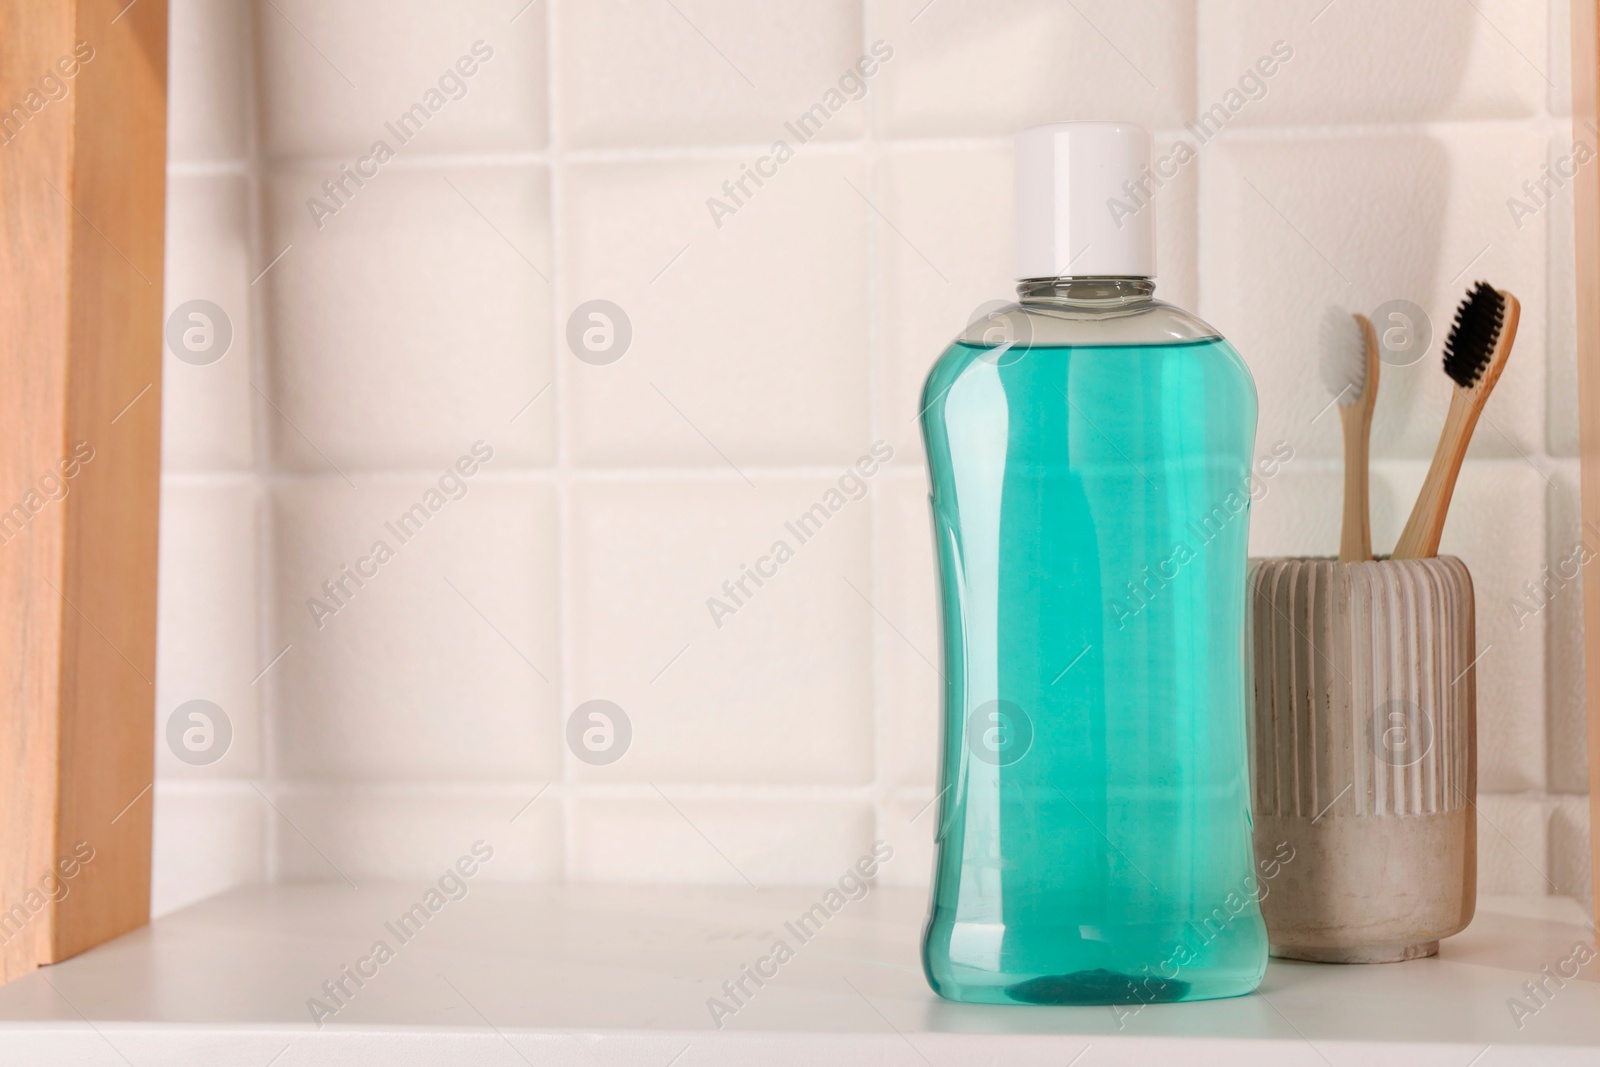 Photo of Bottle of mouthwash and toothbrushes on white shelf in bathroom, space for text